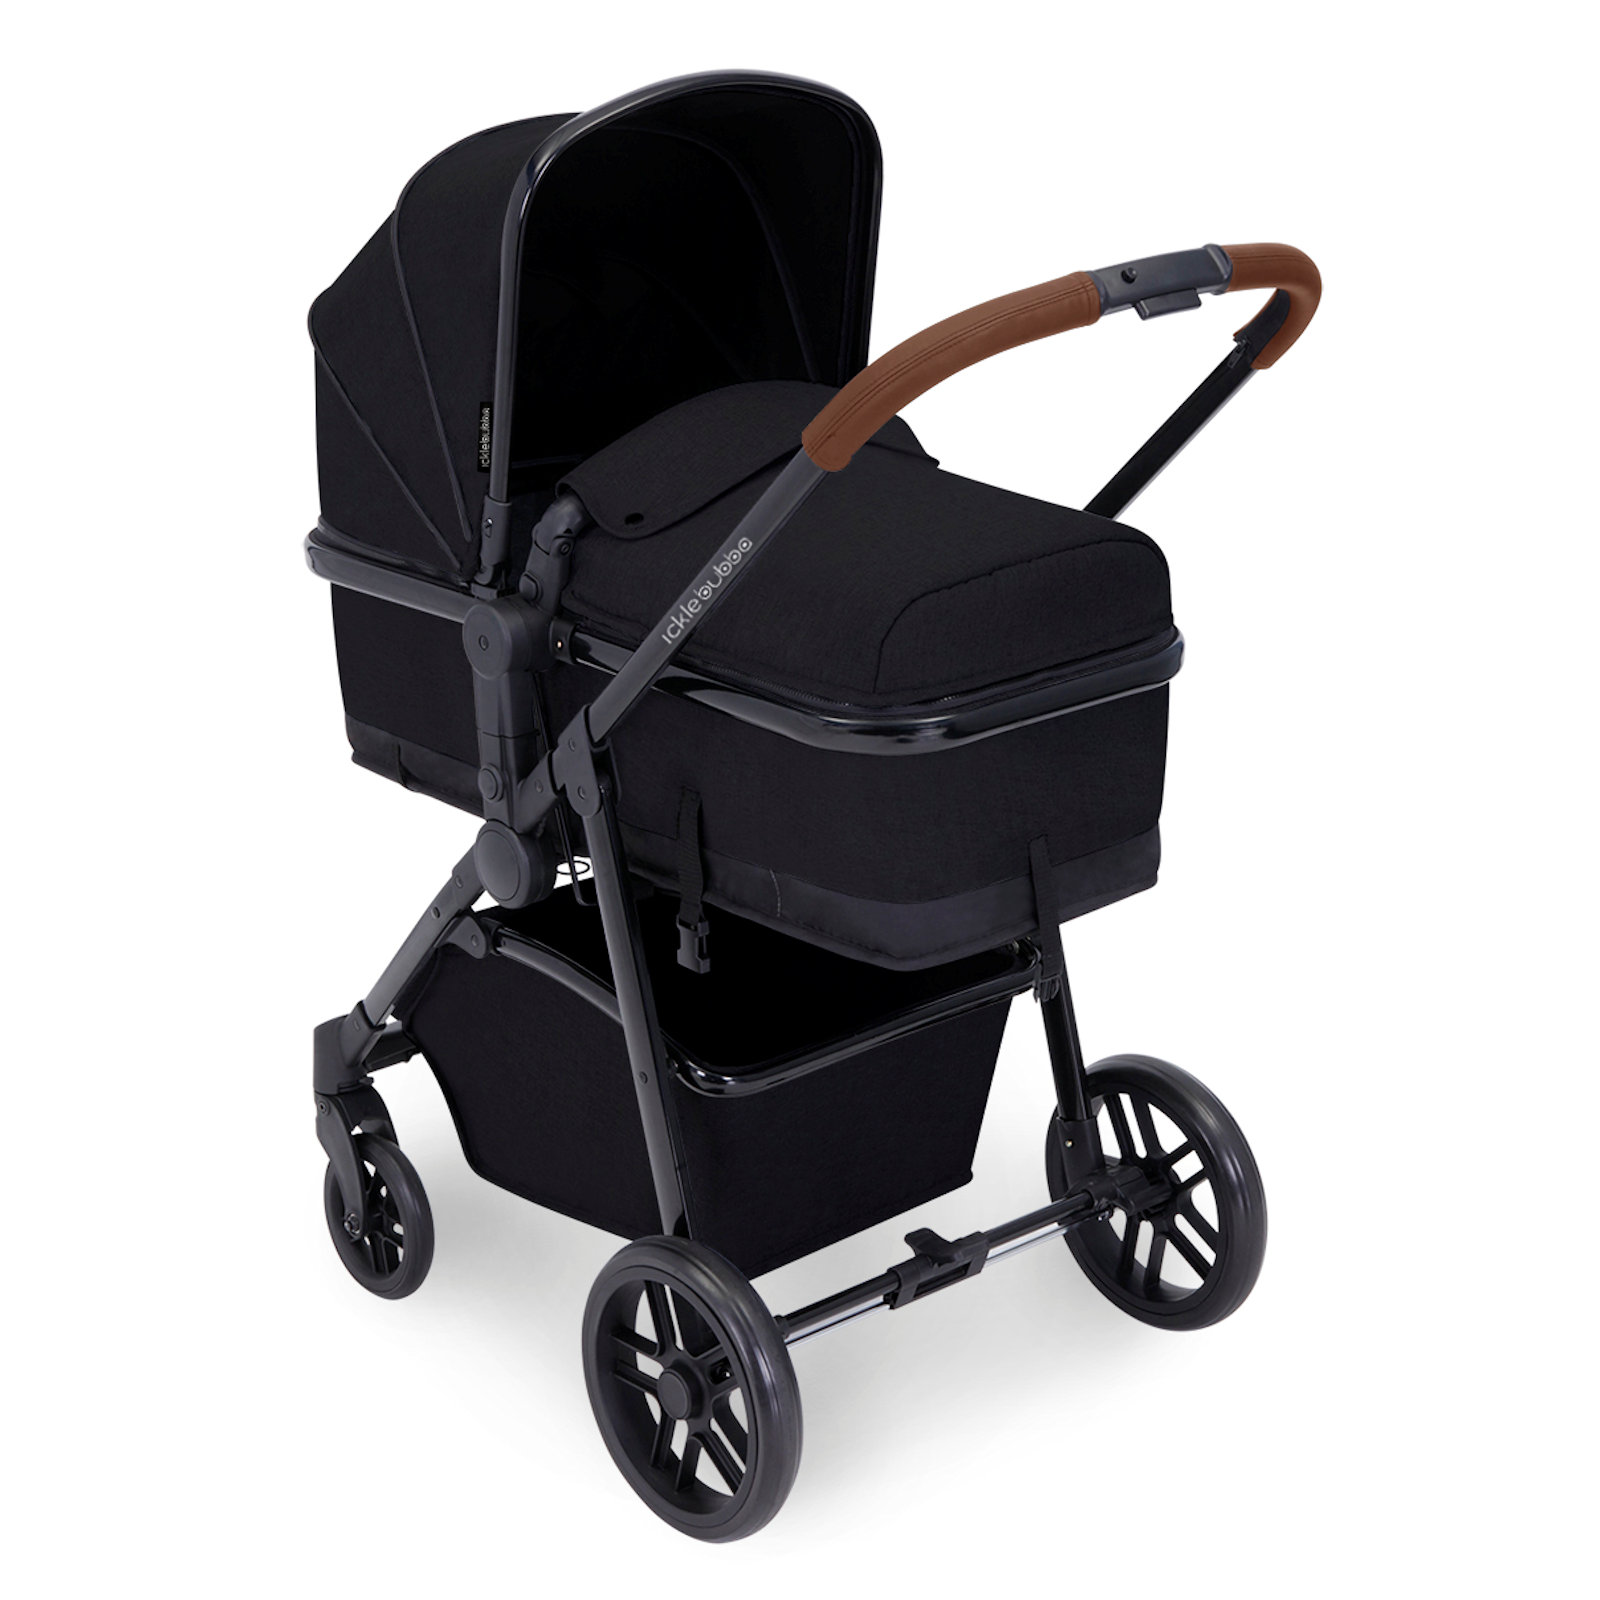 Ickle Bubba Zira Moon 3 in 1 (Astral) Travel System - Black / Tan